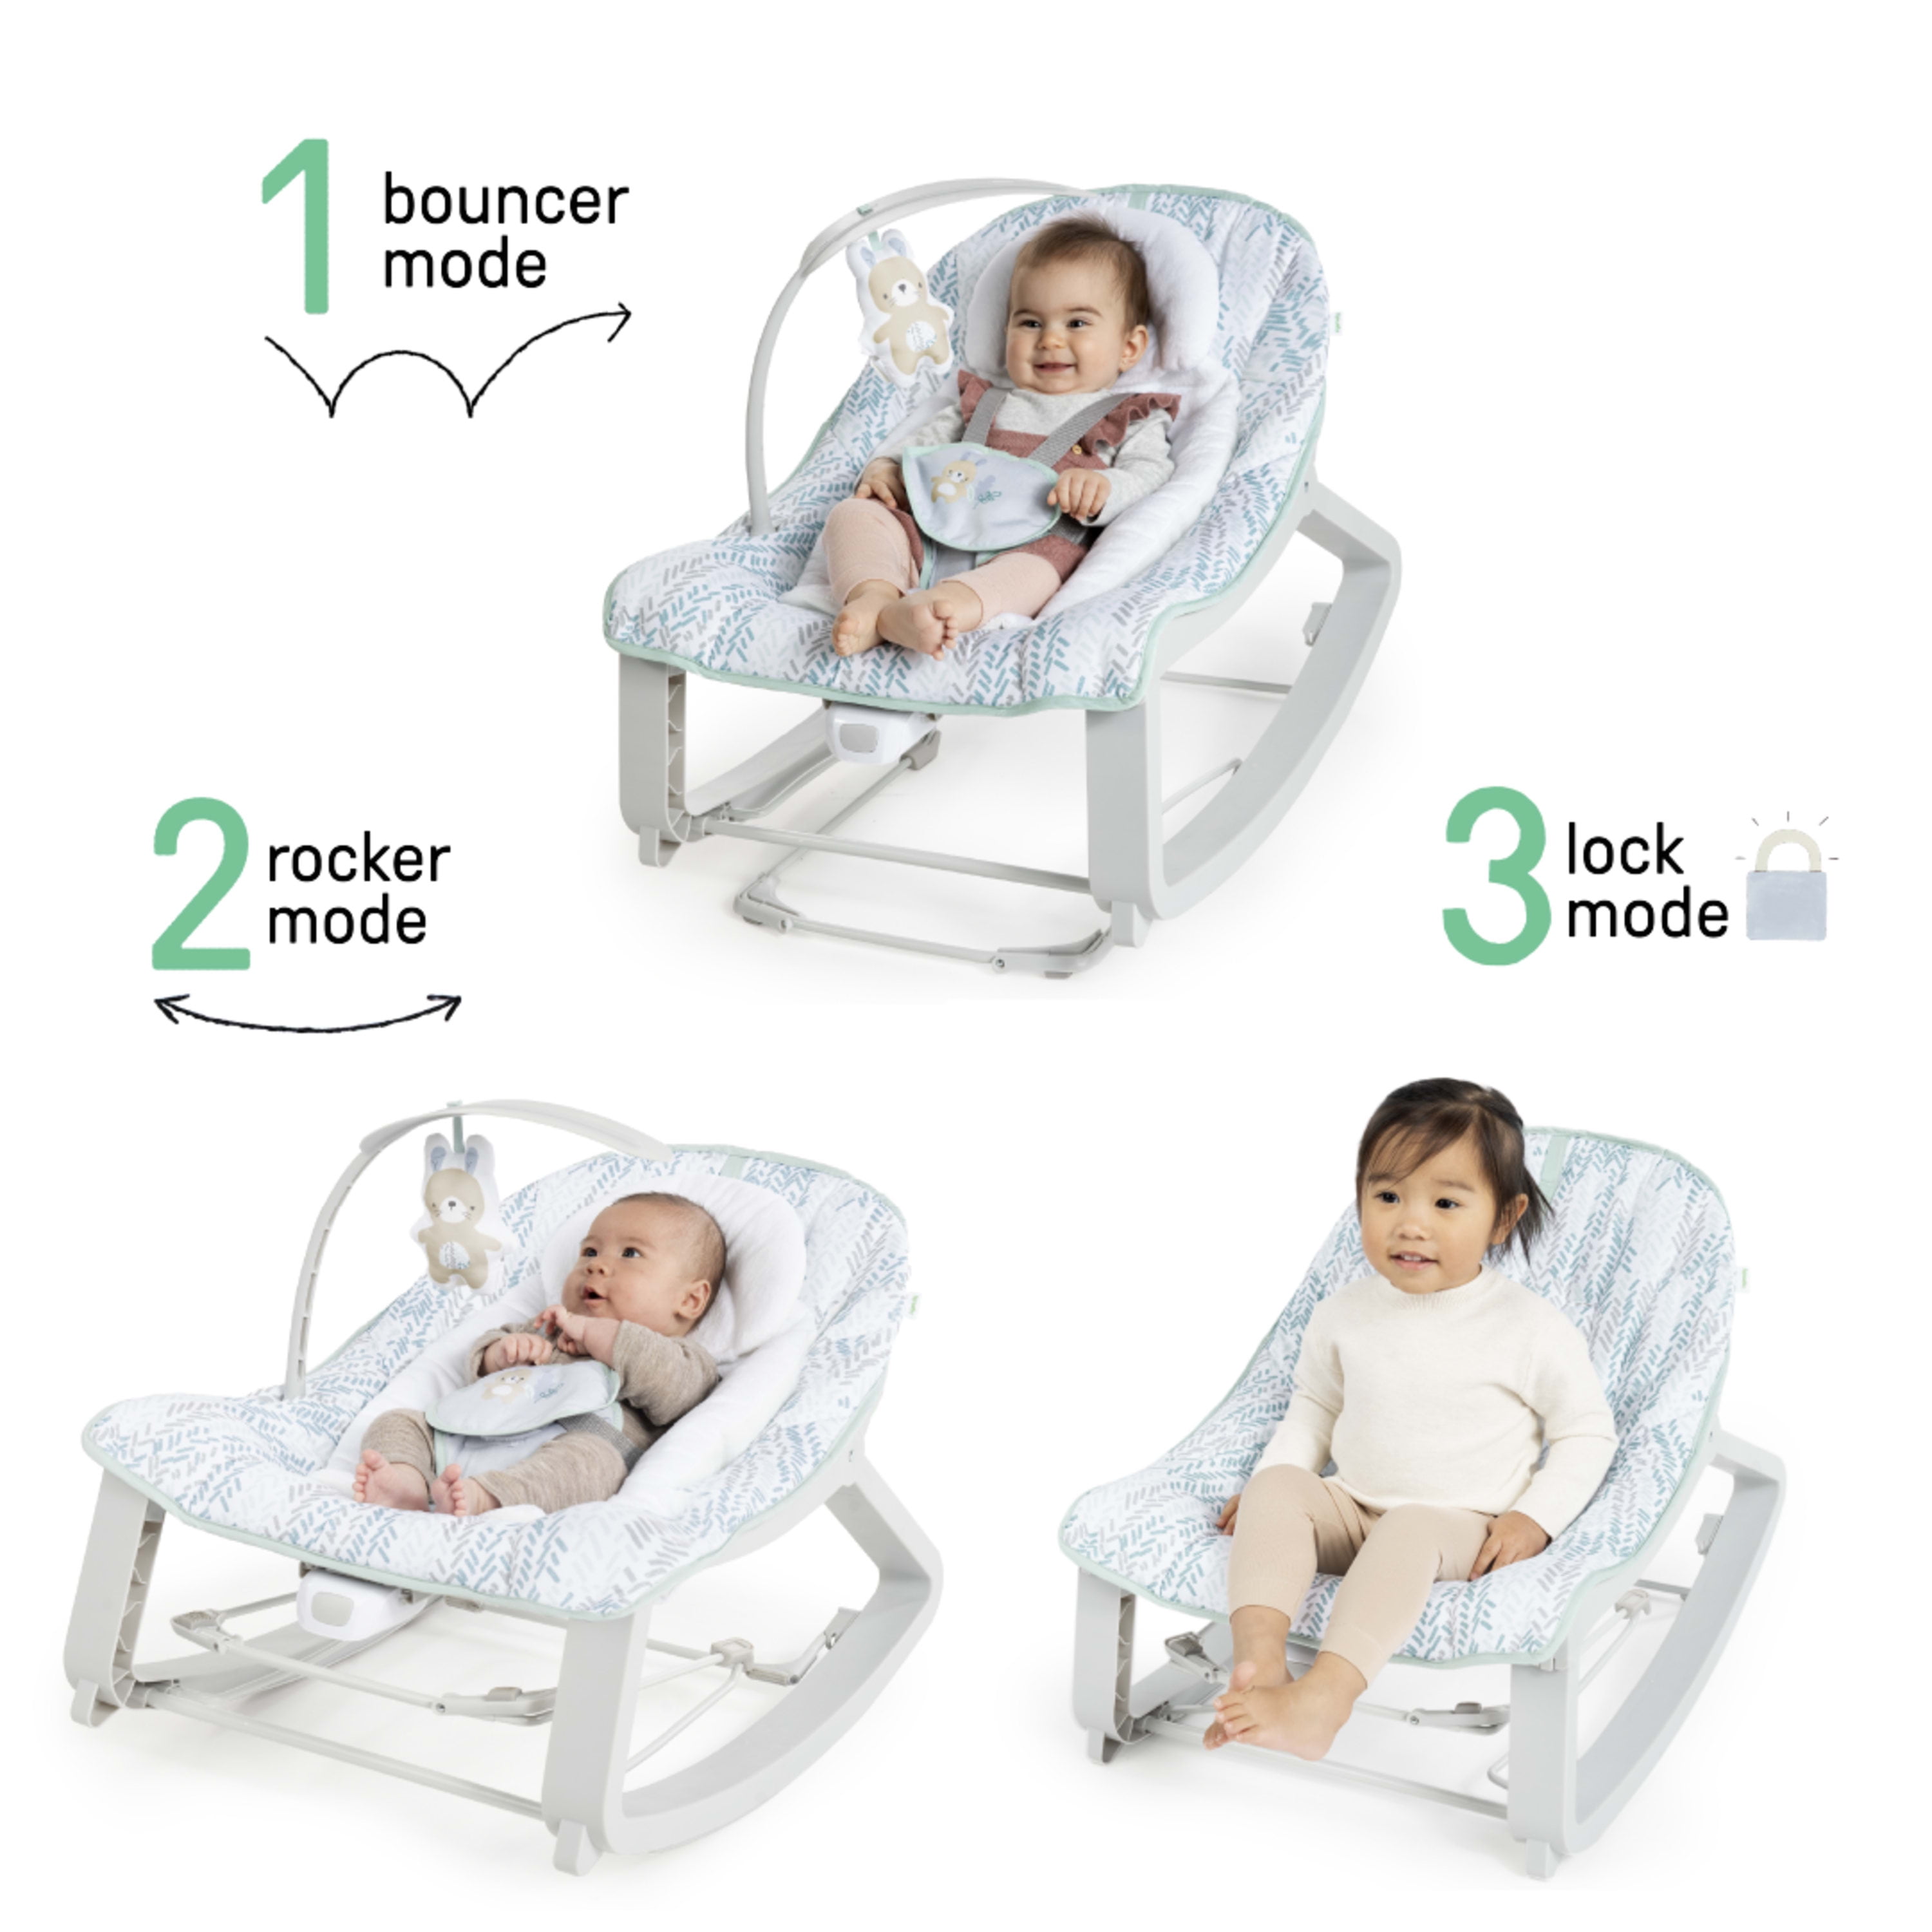 Ingenuity Soothing Baby Bouncer With Vibrating Infant Seat - Flora : Target